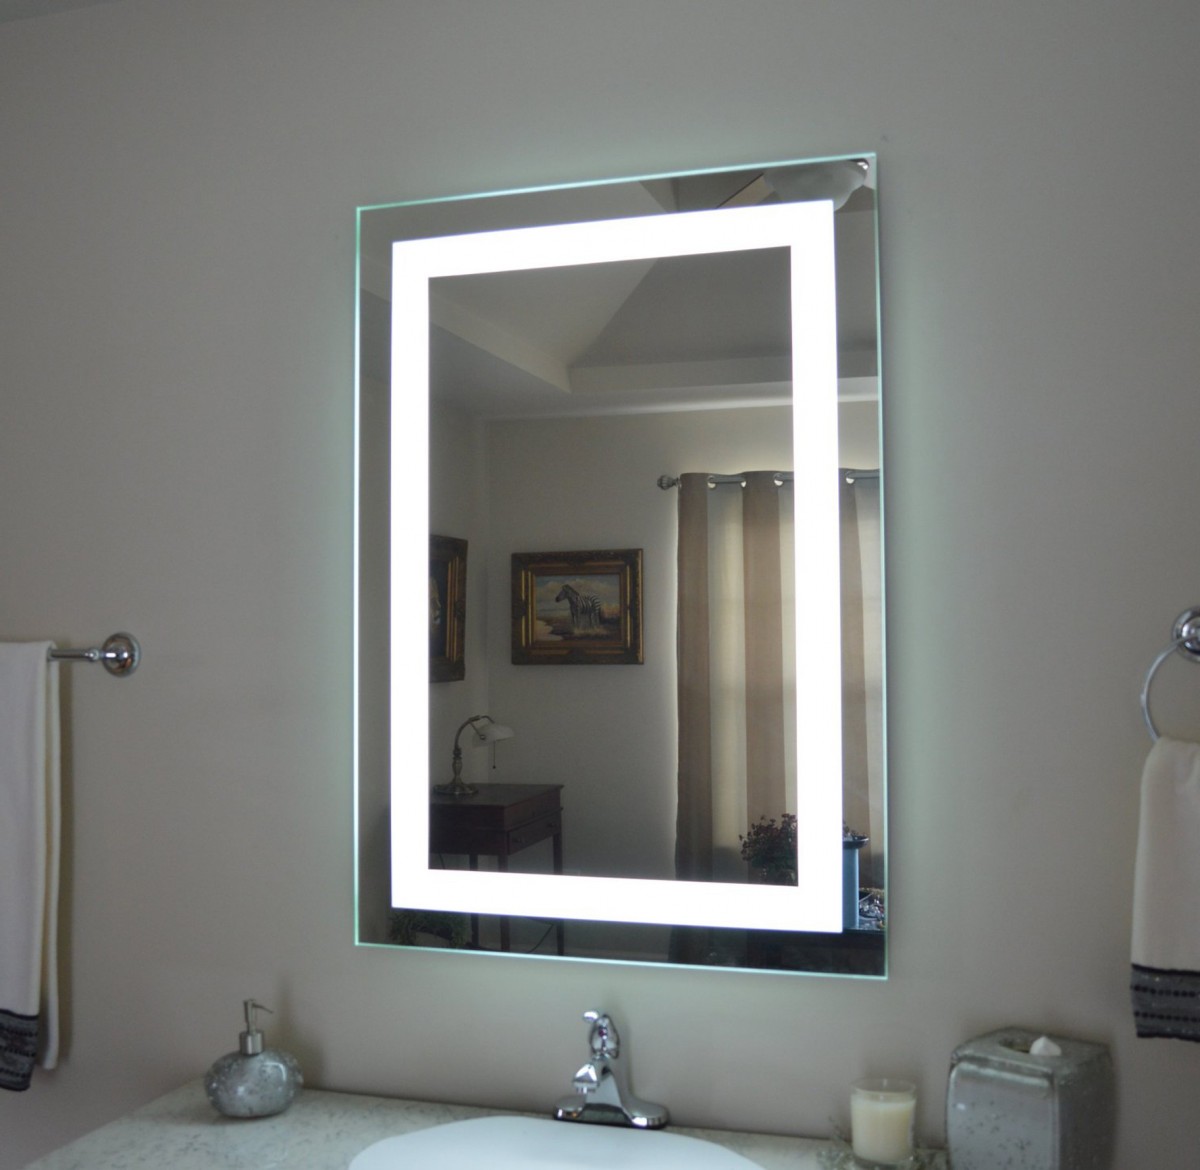 Mirrored bathroom furniture – two in one